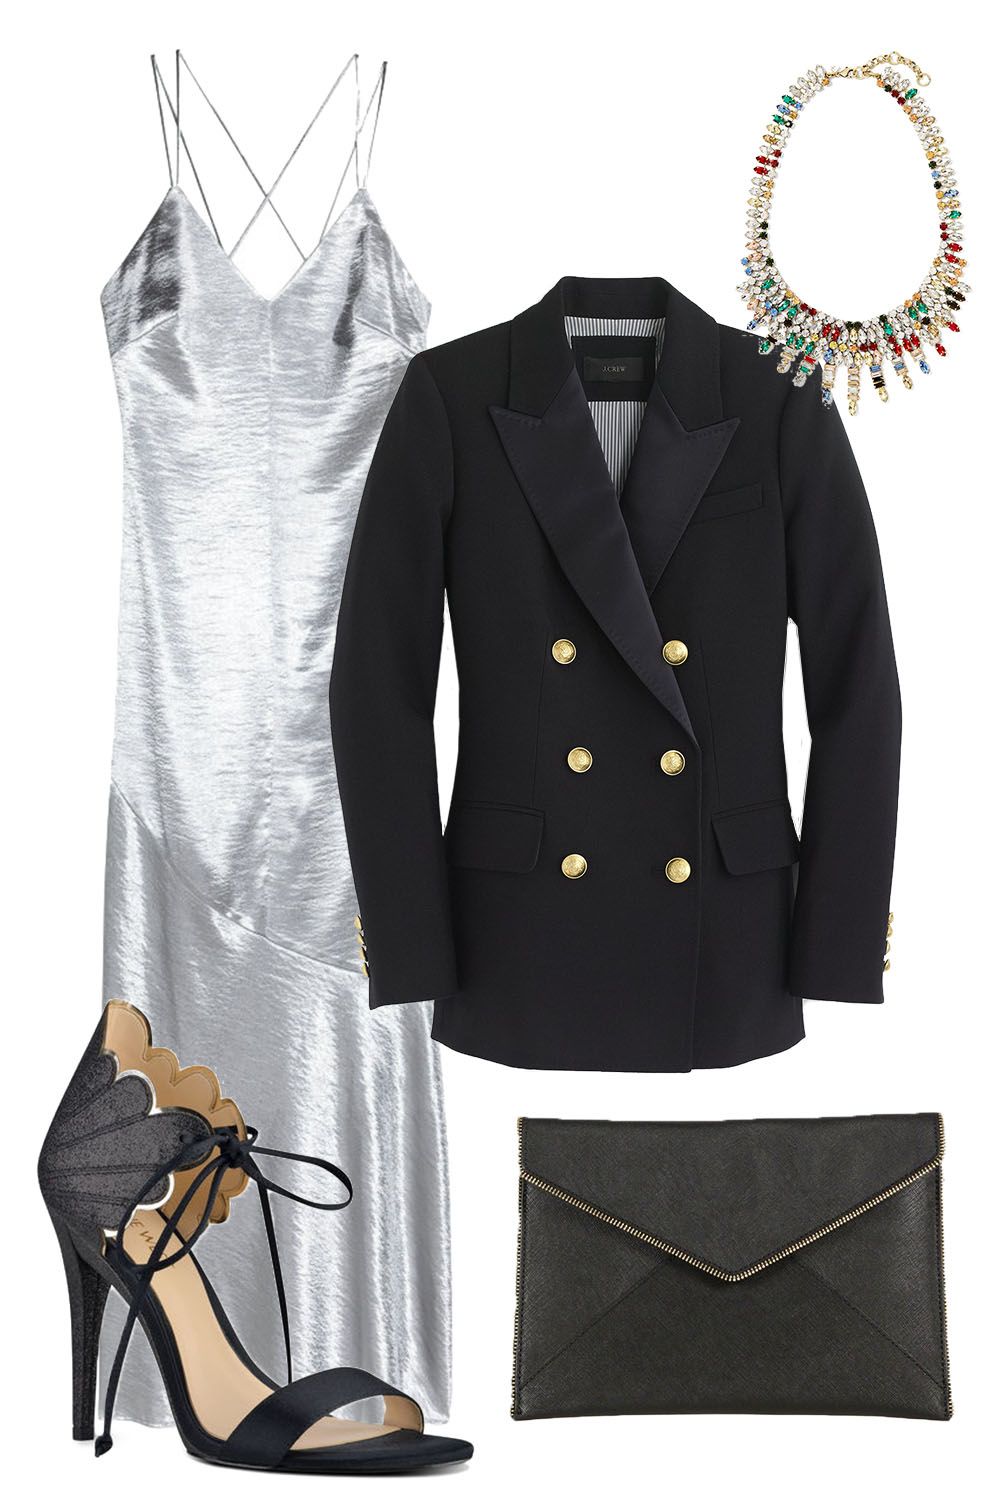 Last-Minute New Year's Eve Outfit Ideas You Can Buy at Your Mall